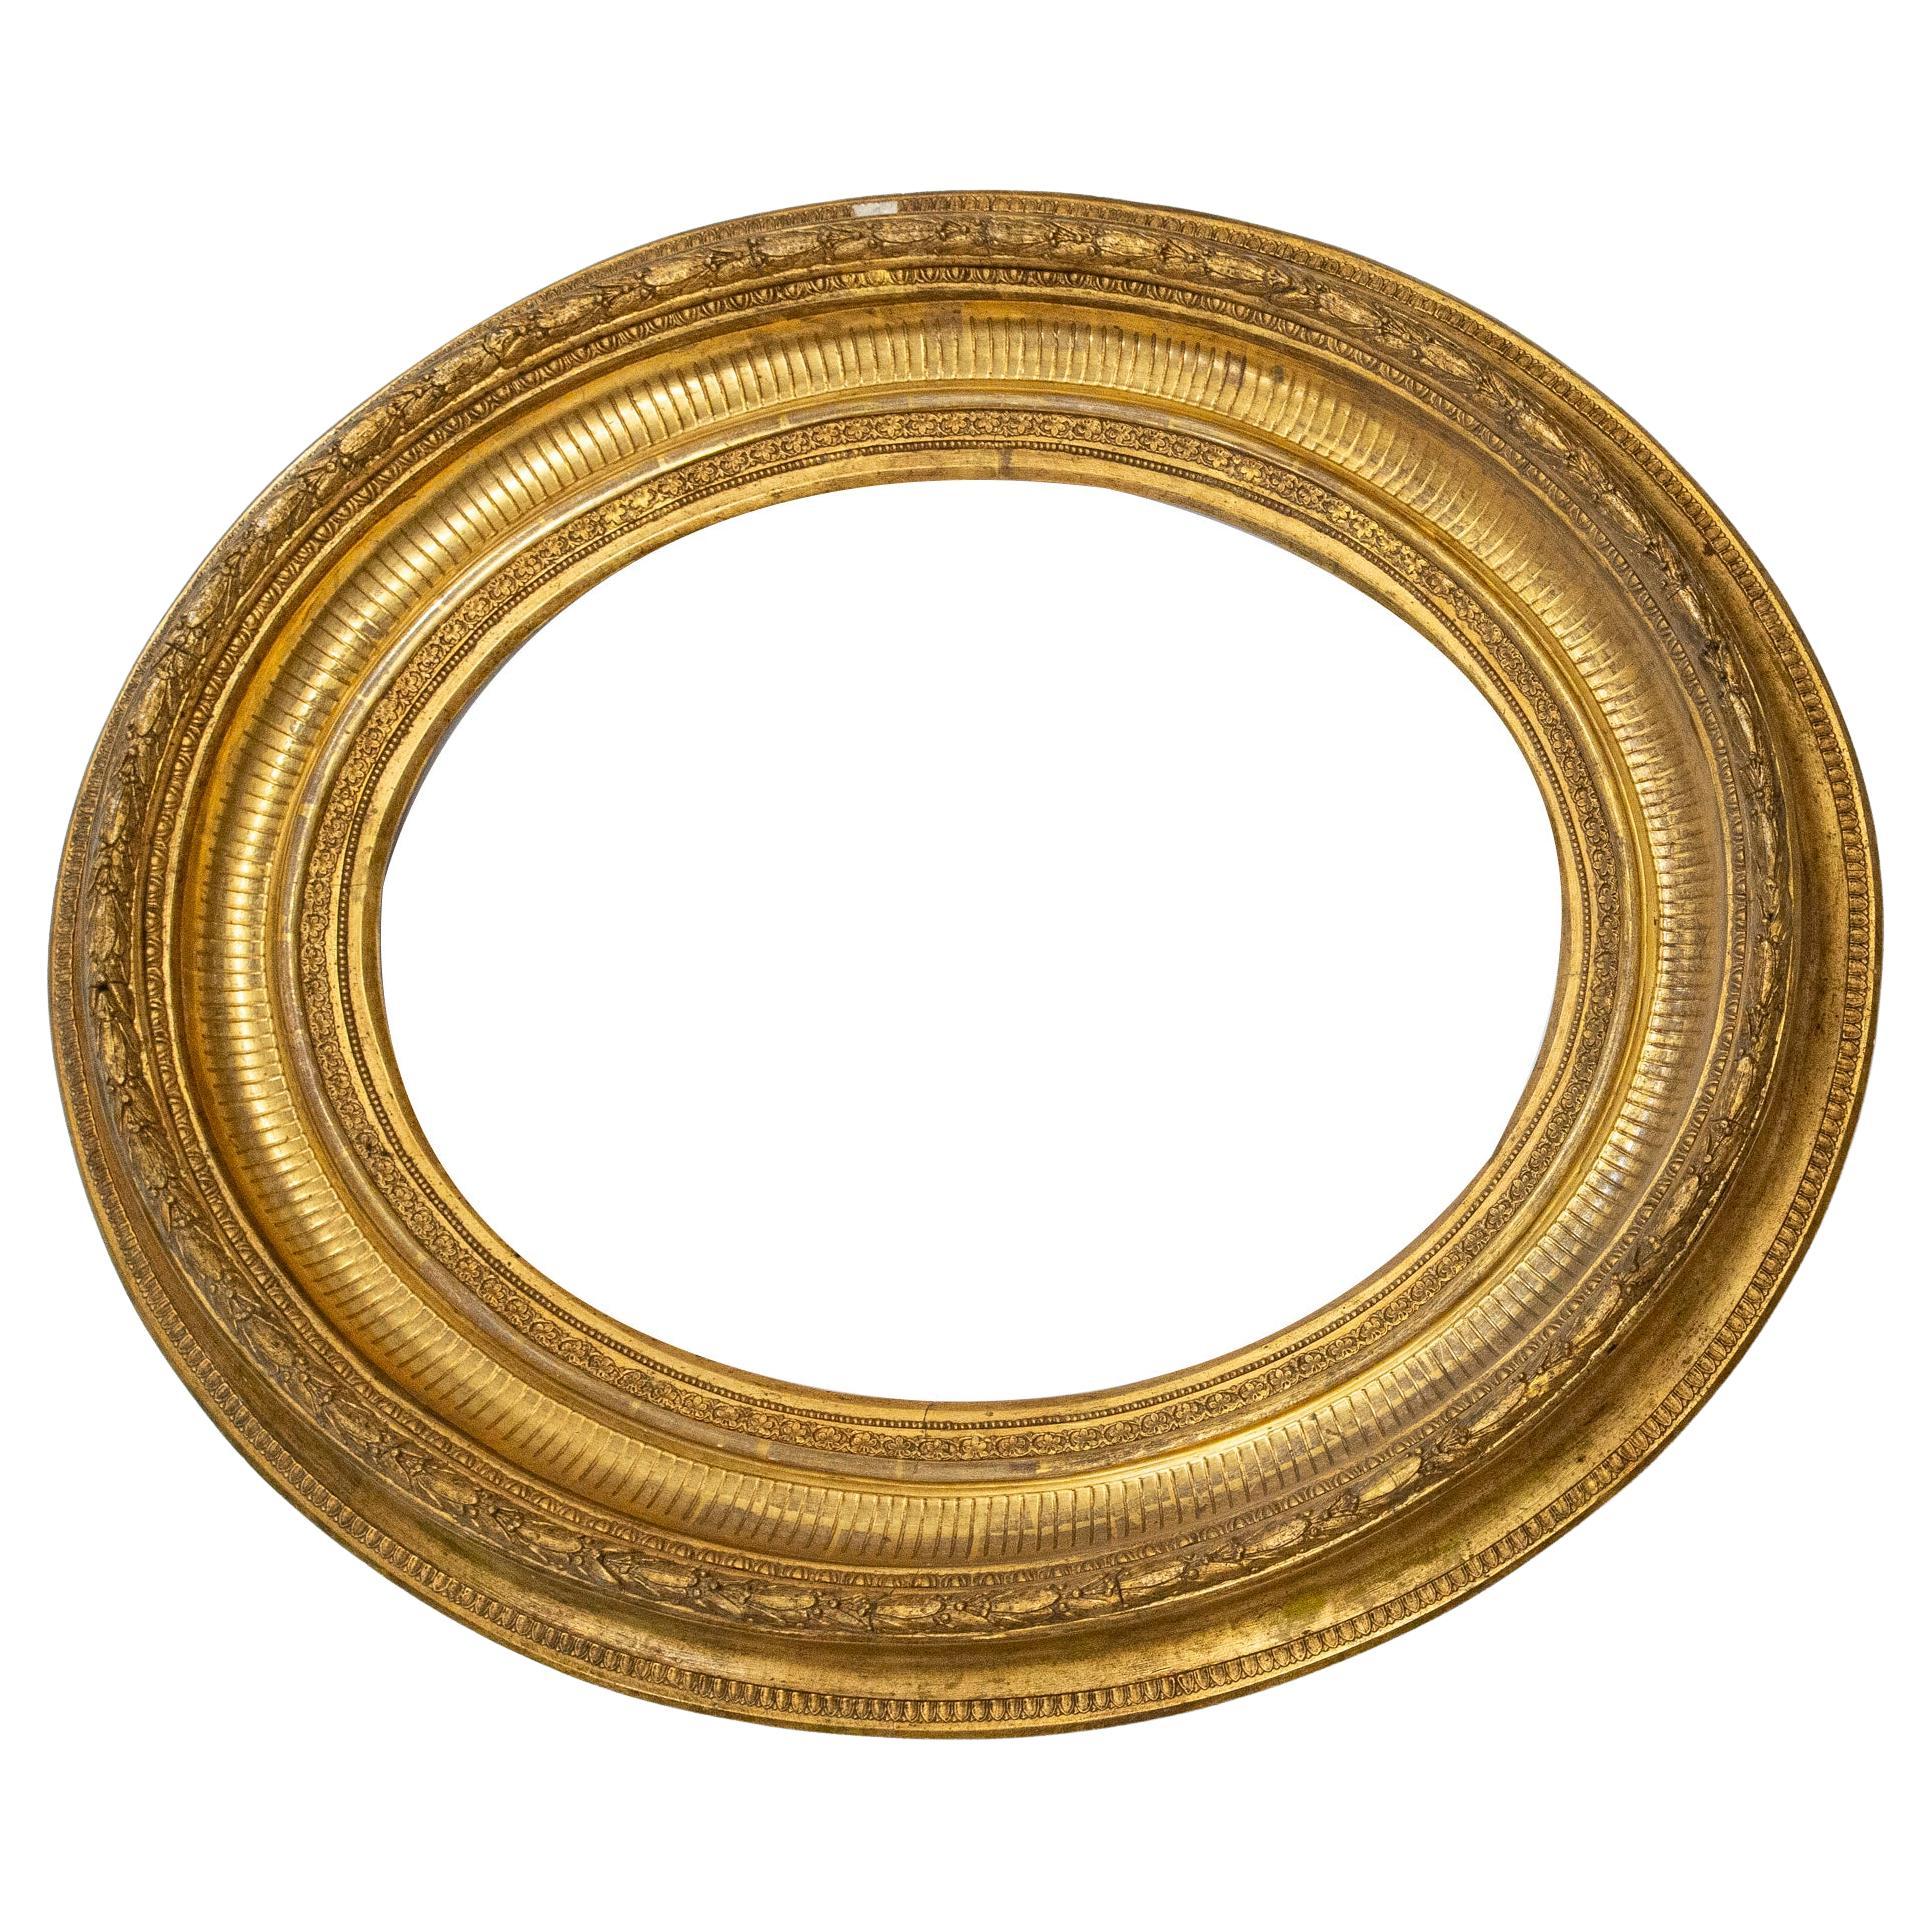 O/6480 - Large golden oval frame, perfect for a mirror: it's better to mount the mirror Yourself, due to transport problems from Italy. On request i can do, however.
It's very important and elegant , it can occupy a wall.
